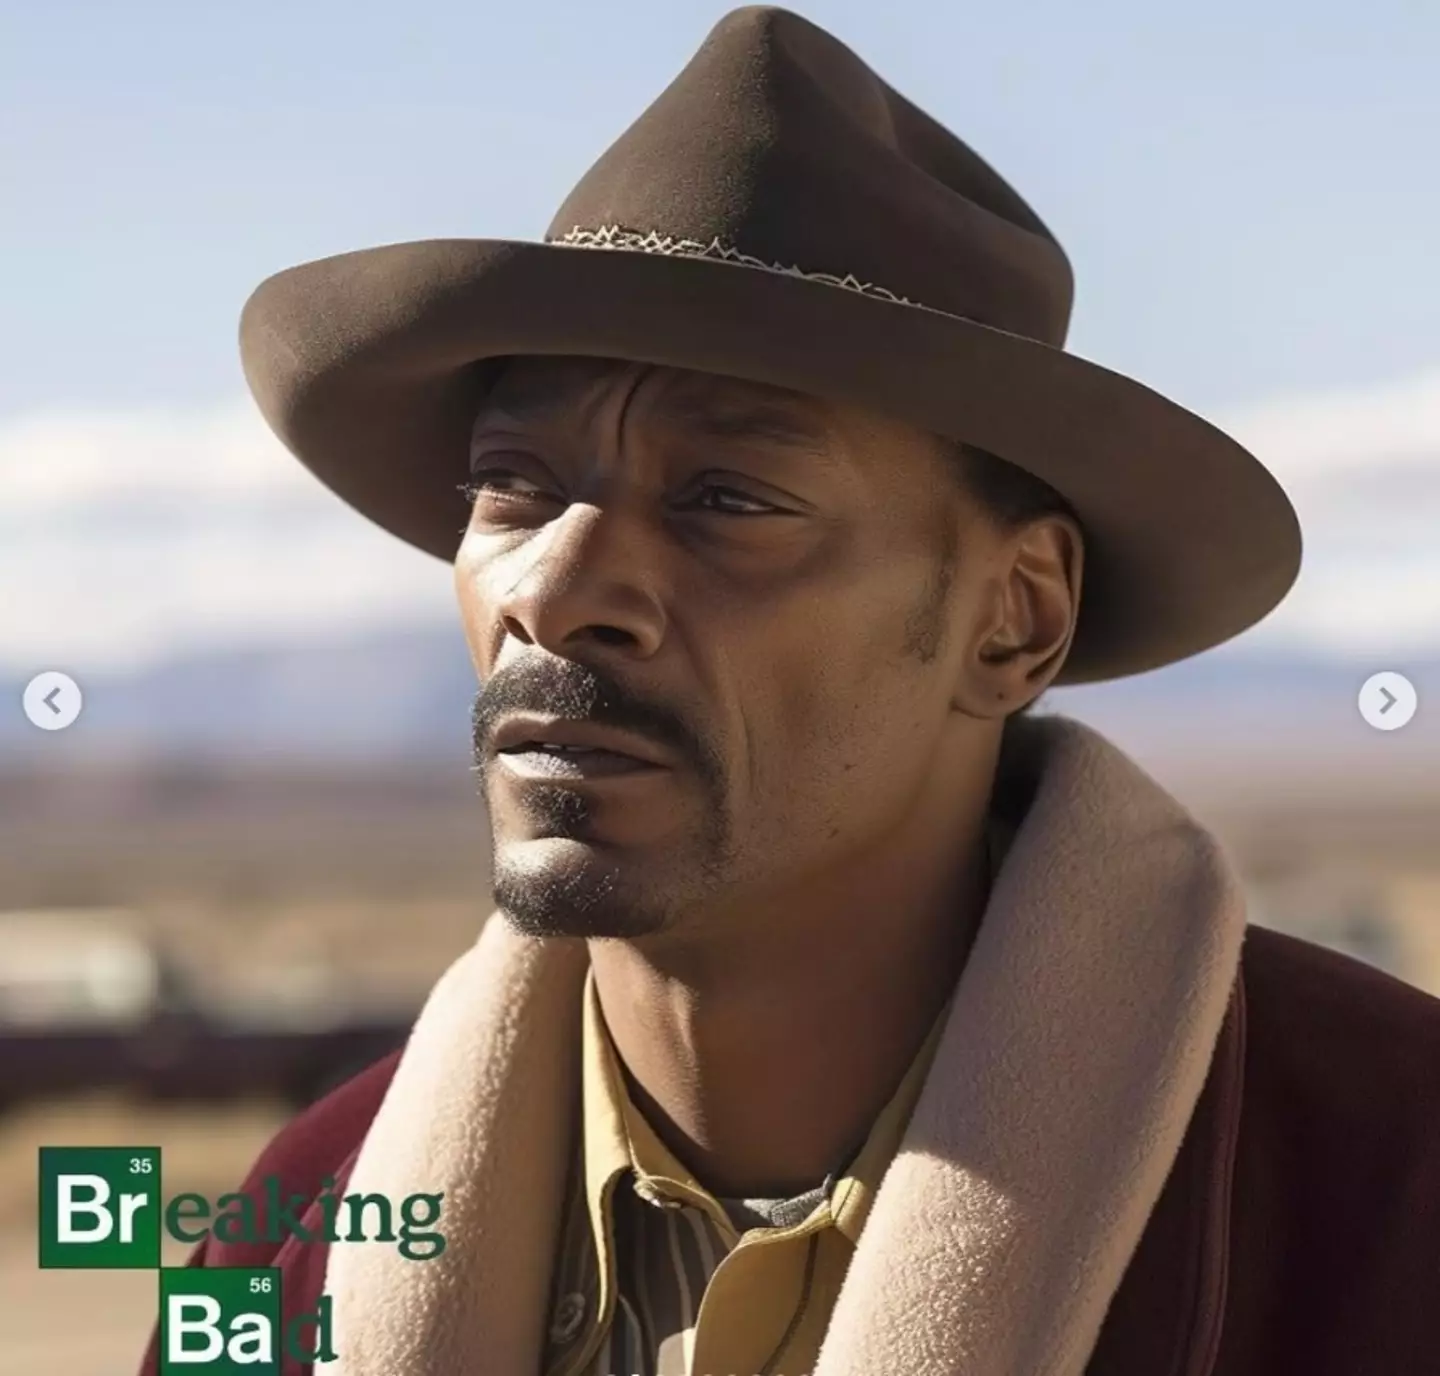 This one says Breaking Bad but I'm getting more of a Yellowstone vibe from it.